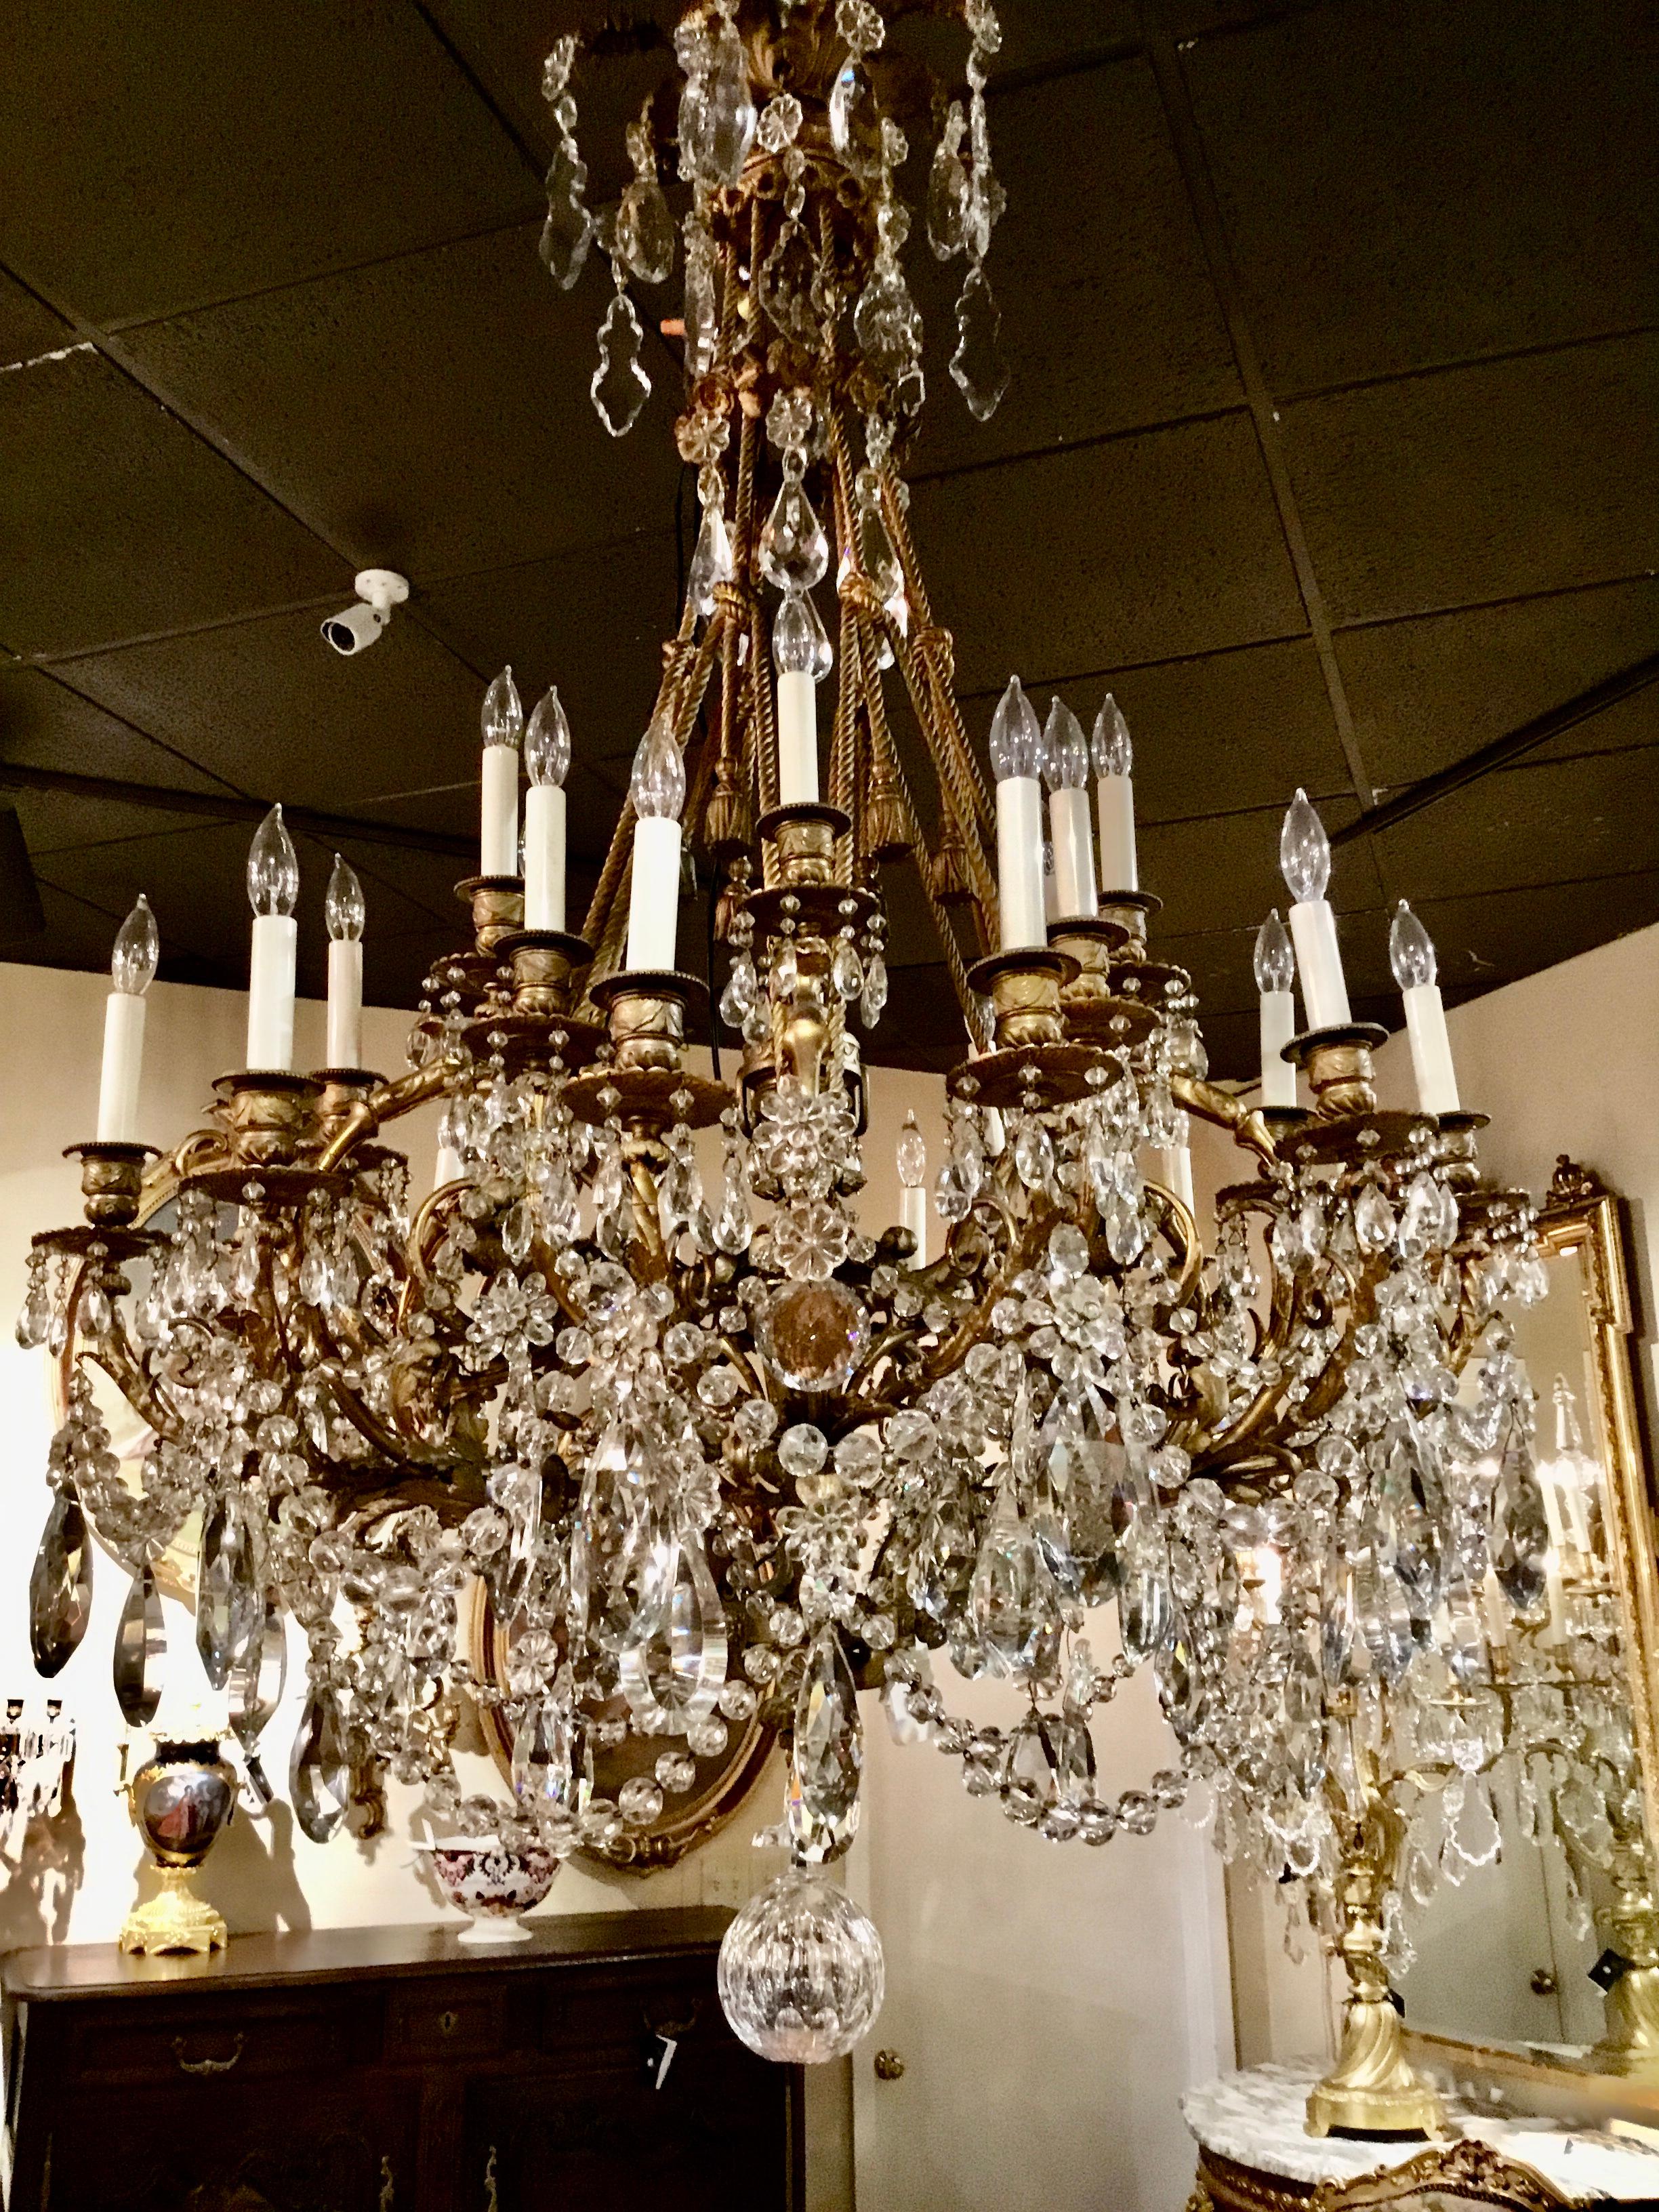 Three tiers of lights with a total of 24 lights decorate this incredible piece.
It was custom designed for a ship builders home in the city of New Orleans
The roped bronze supports and tassels were designed to have a
Relevance to the occupation